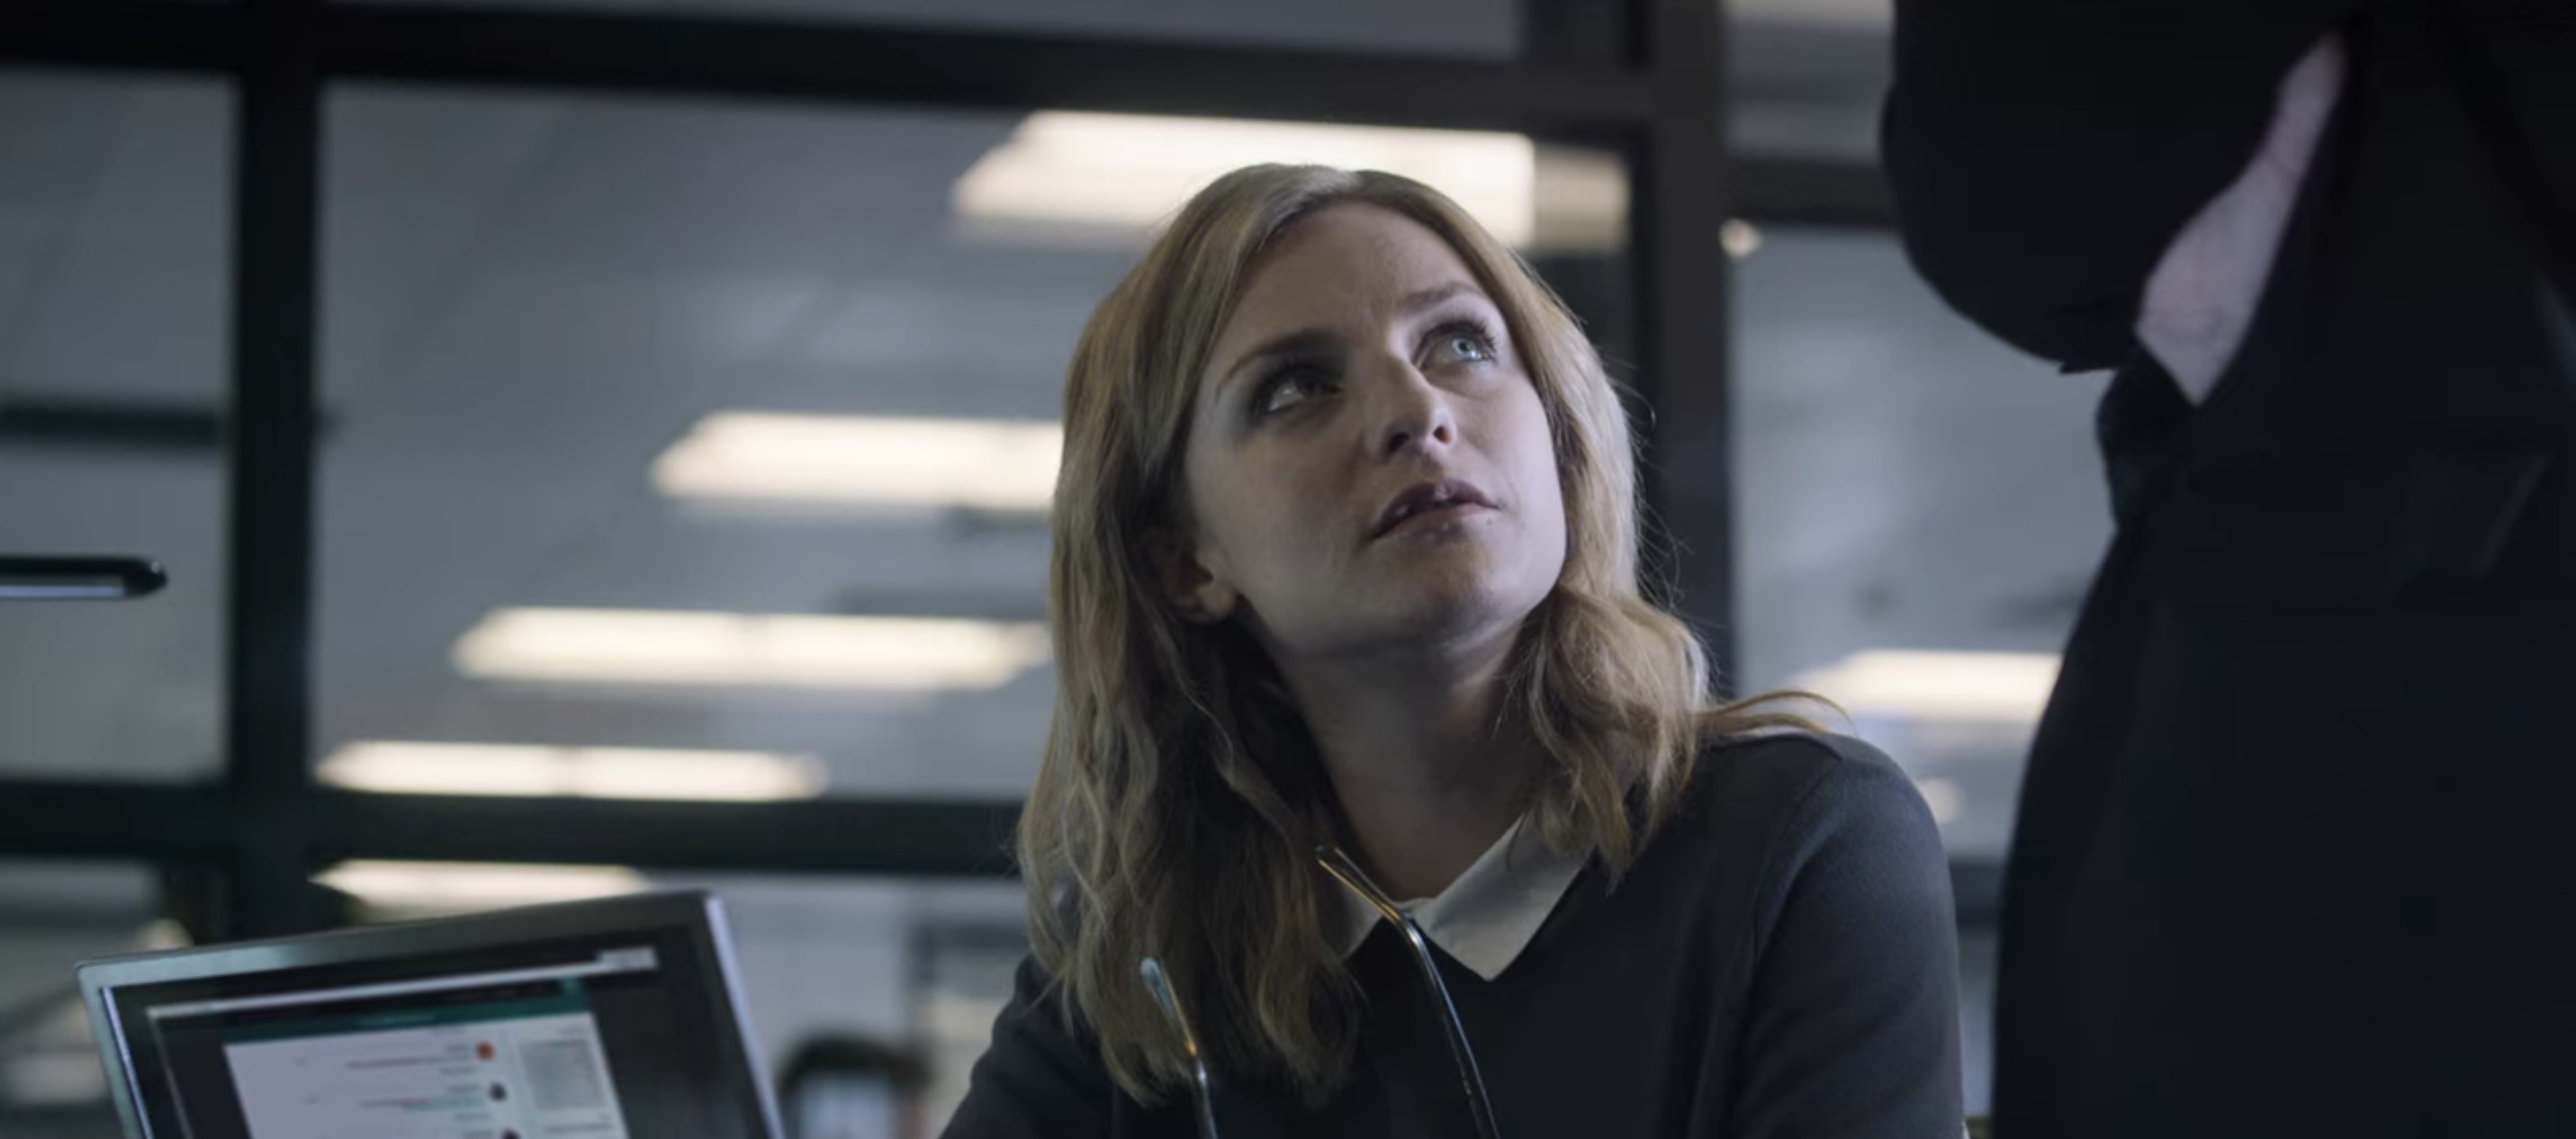 Black Mirror Cast on Netflix - Faye Marsay as Blue Colson ("Hated in the Nation")